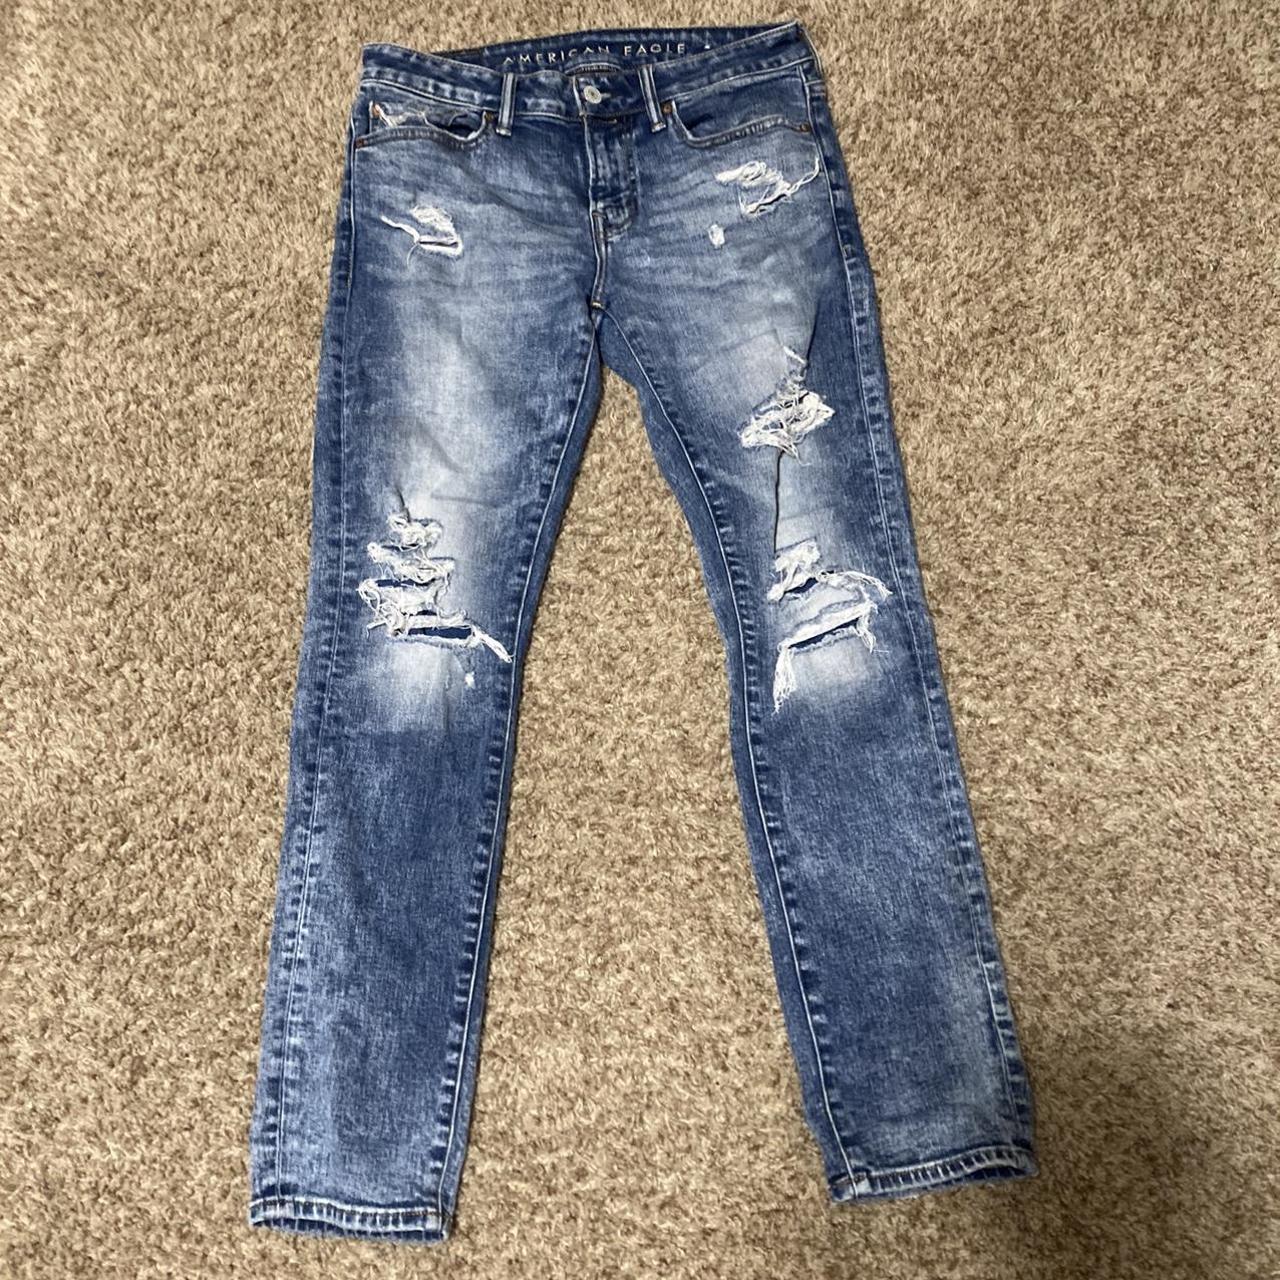 American Eagle ripped Skinny Jeans Size 29x30 No flaws - Depop